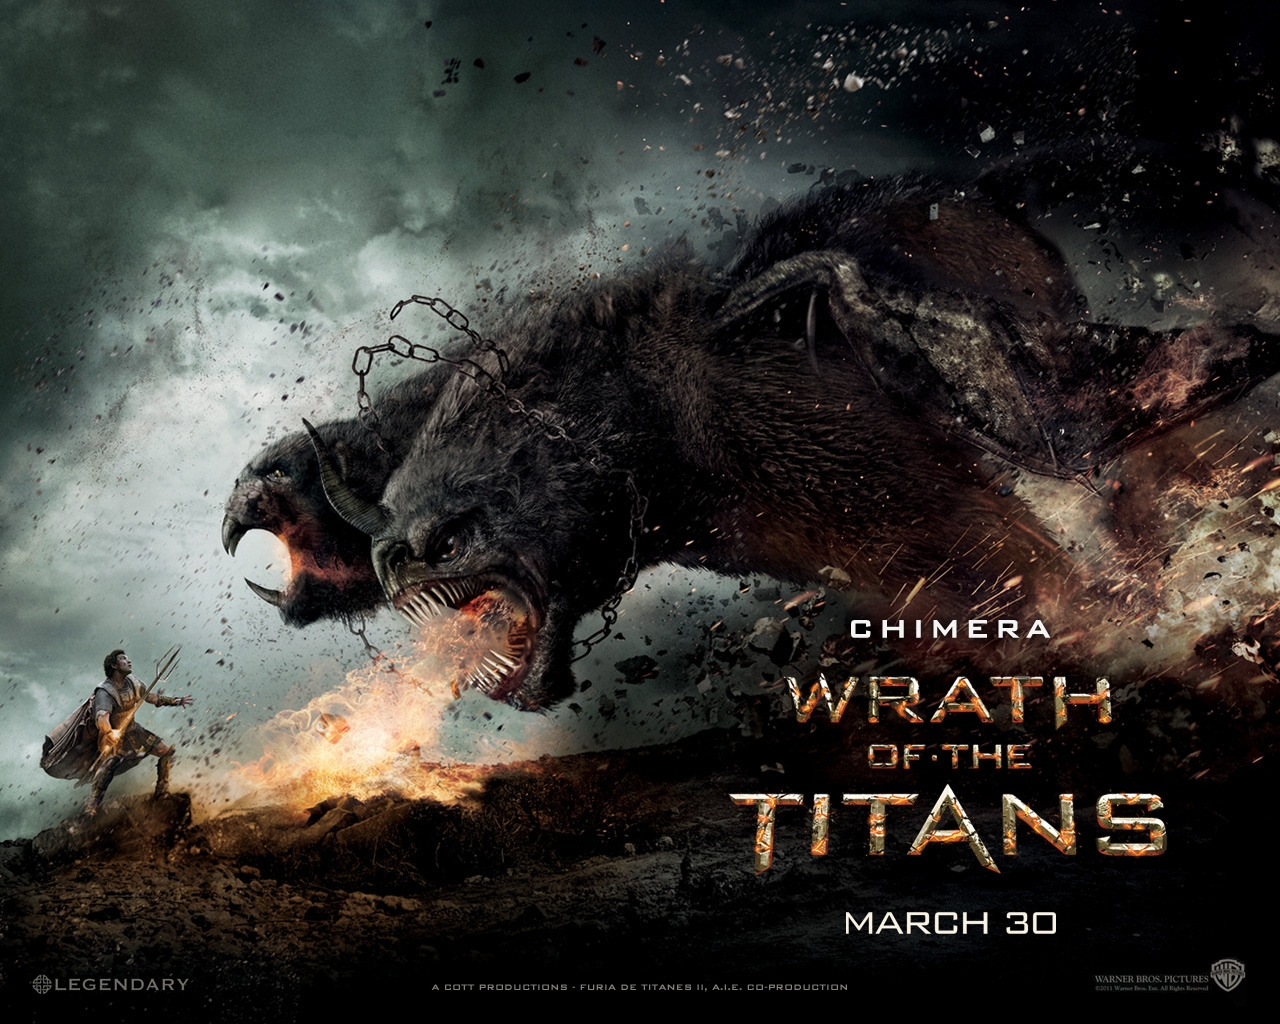 Chimera Wrath of the Titans for 1280 x 1024 resolution